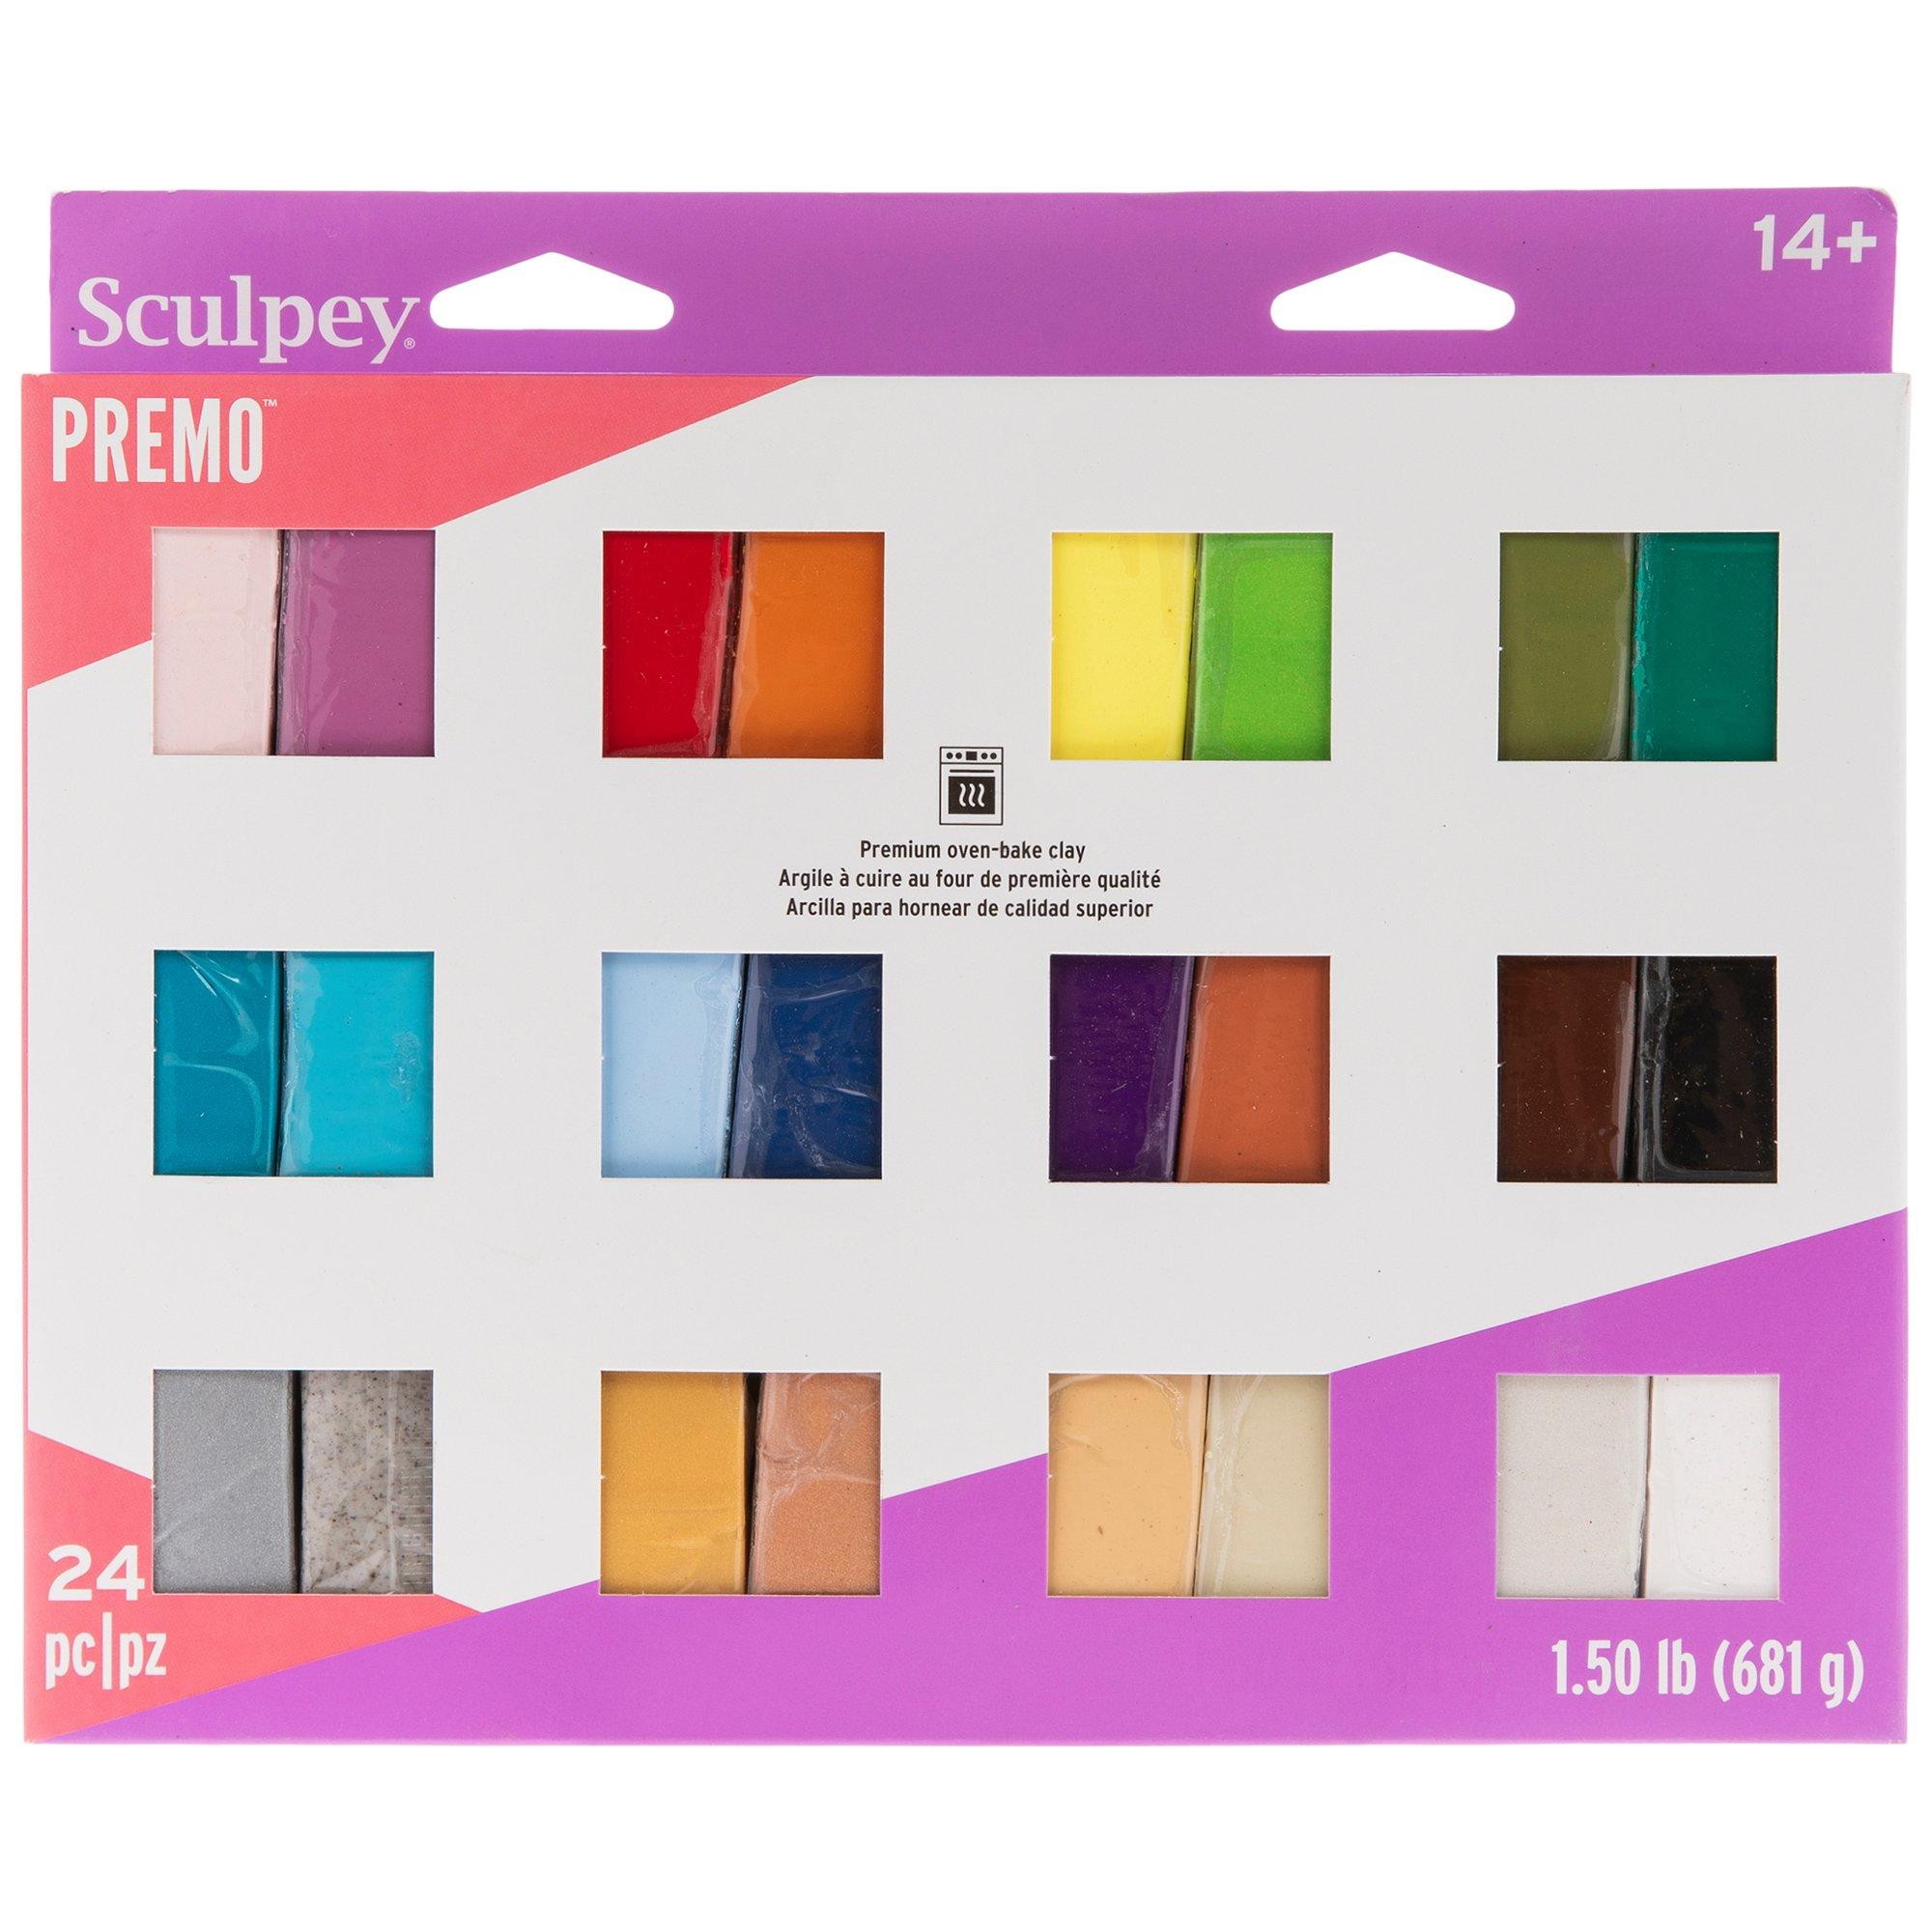 Sculpey Premo Accents Oven-Bake Clay, Hobby Lobby